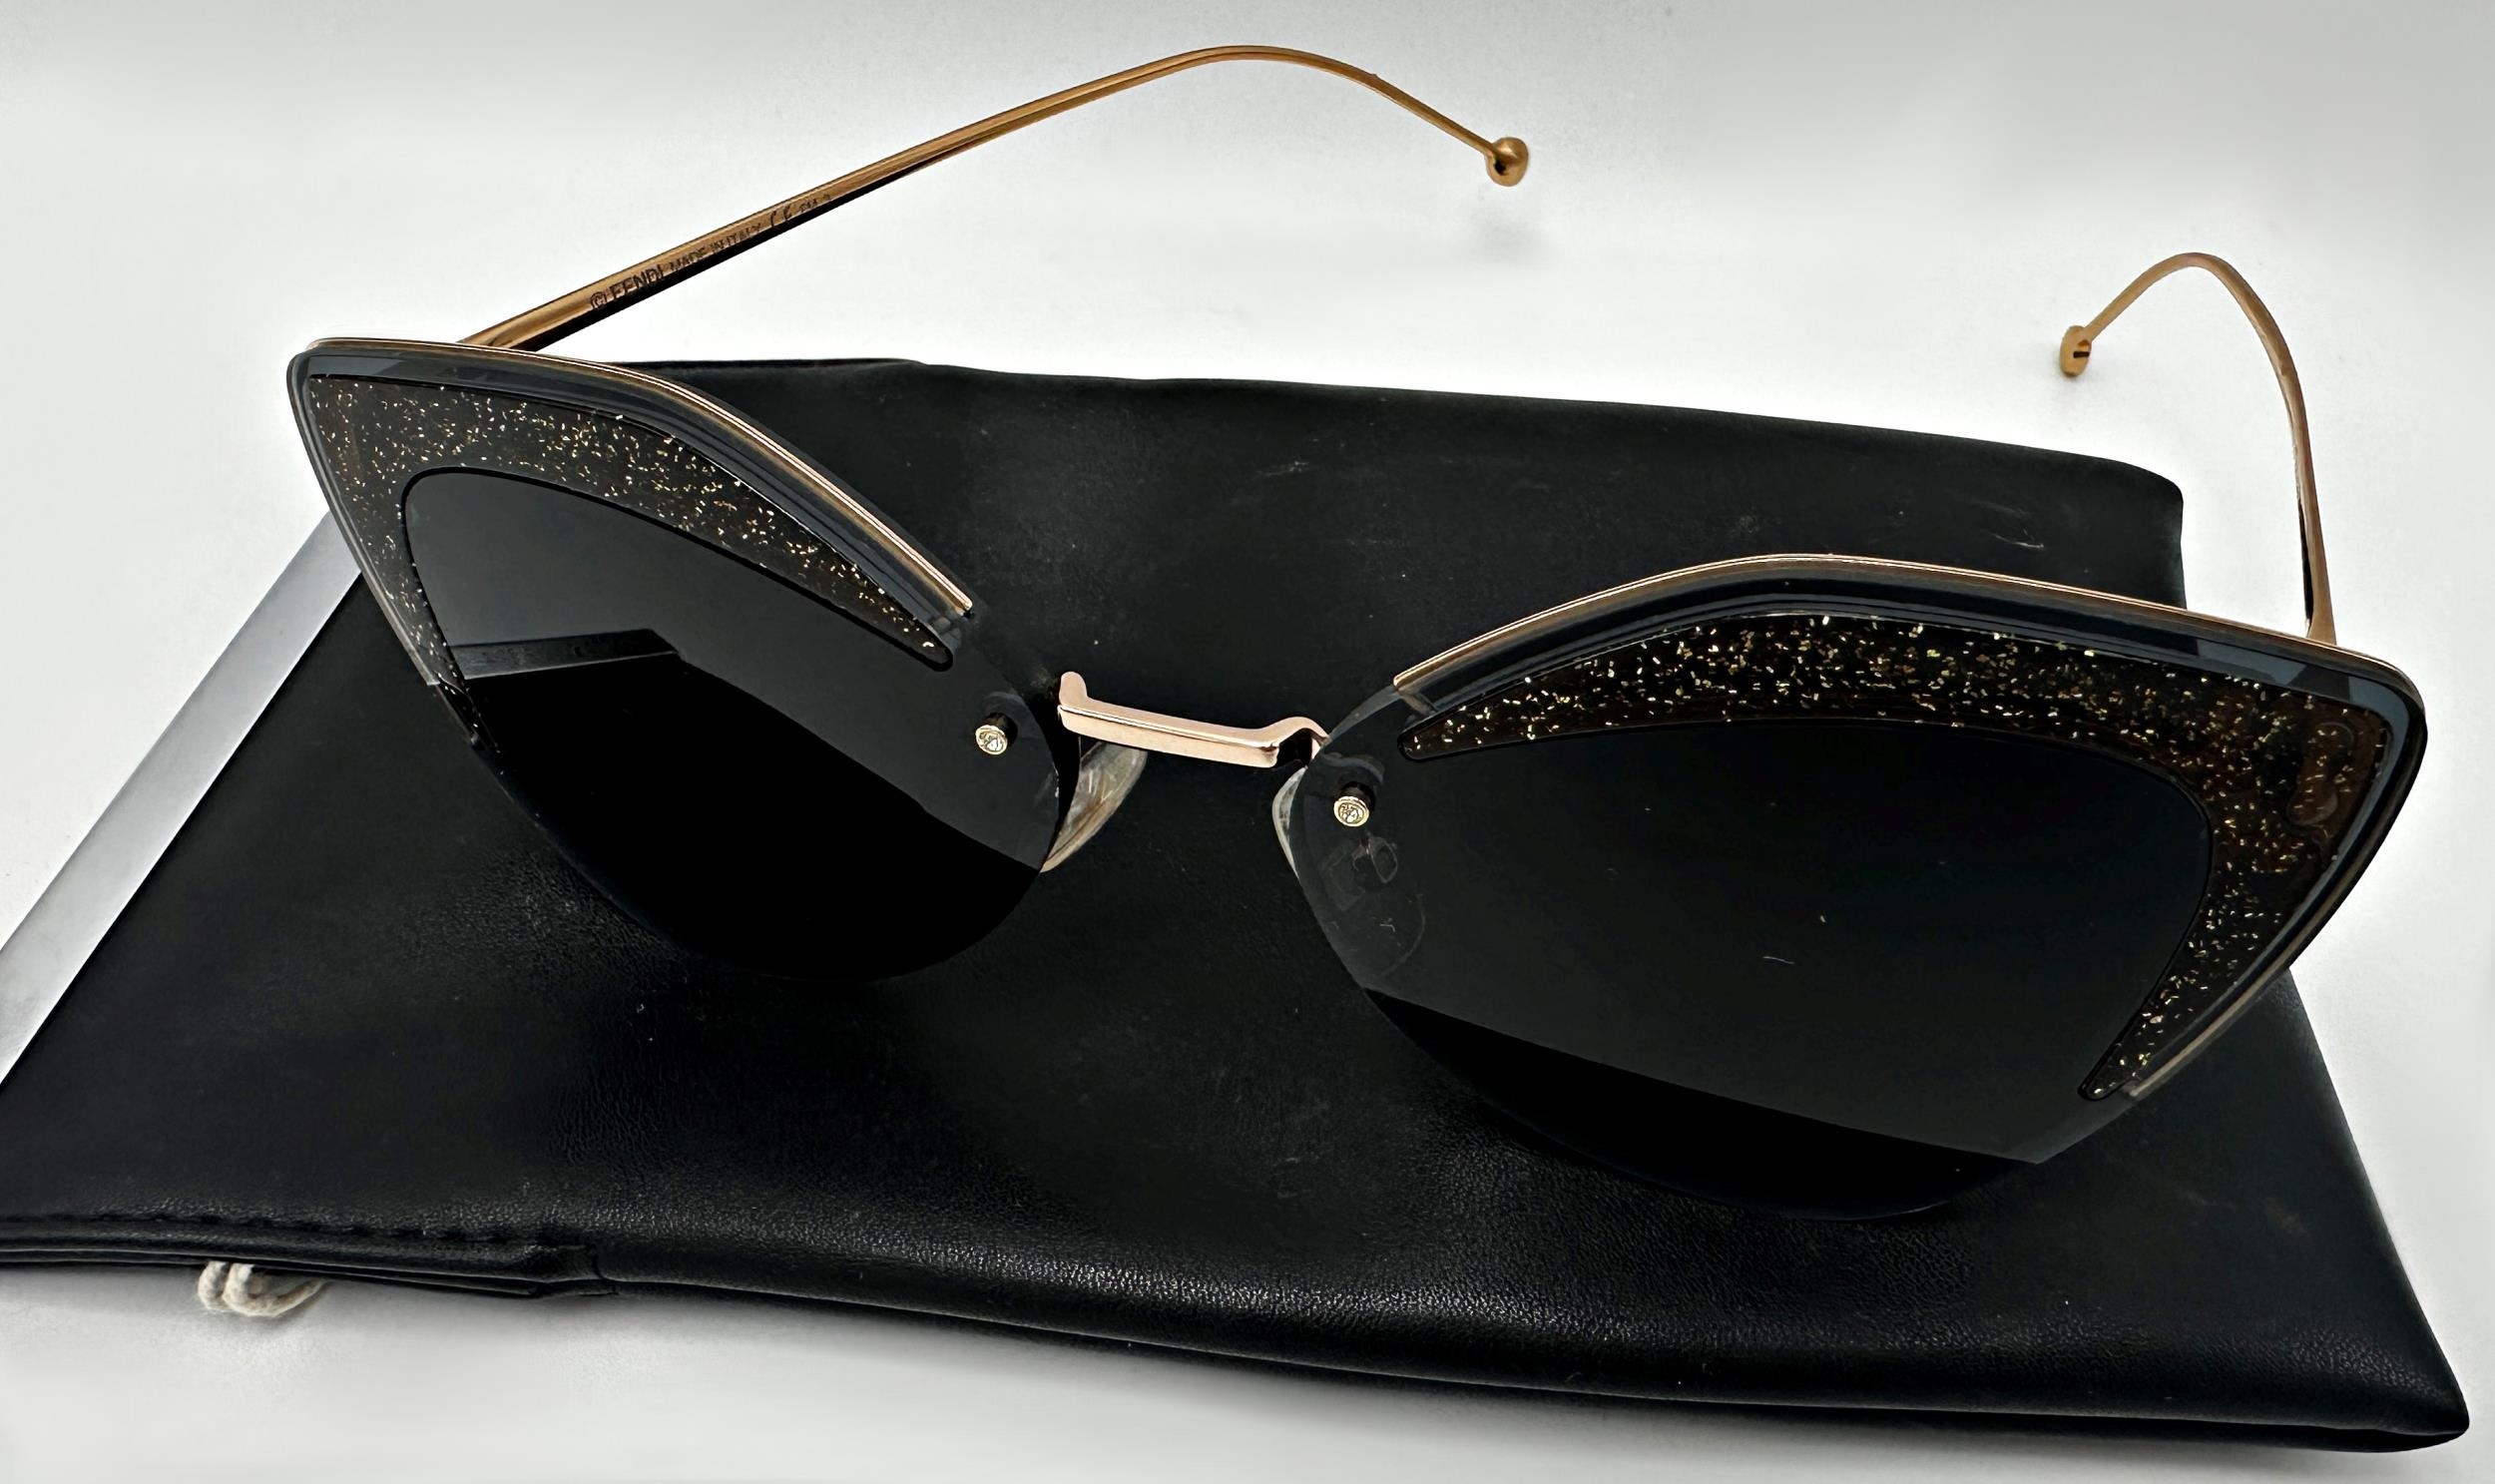 Fendi Eyewear Glittered Cat Eye Sunglasses in black and gold with branded dust cloth and case - Image 2 of 3